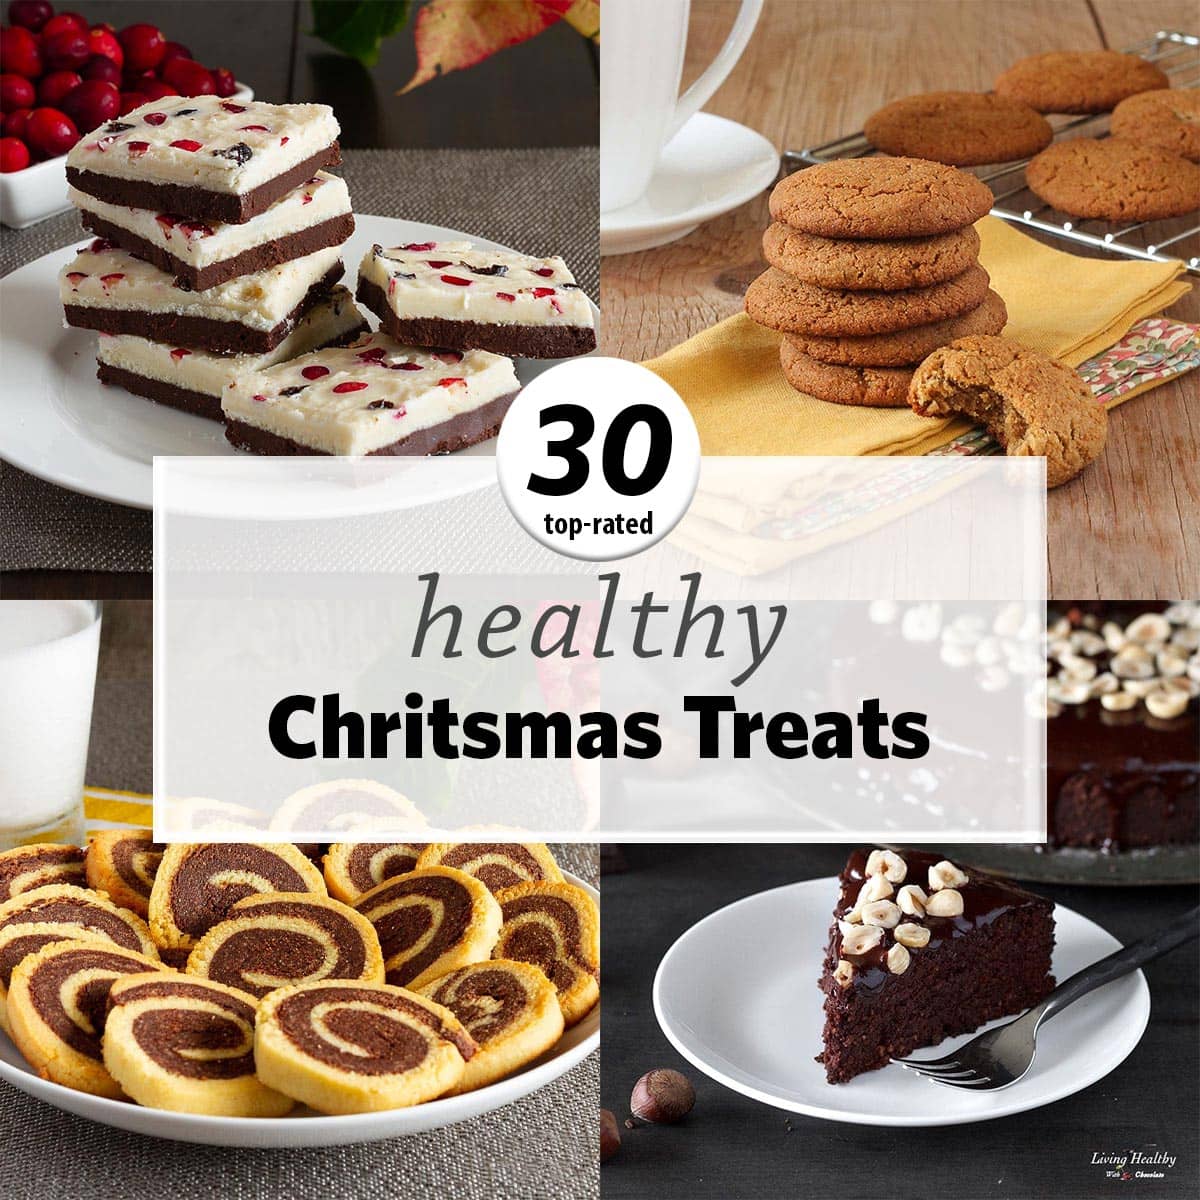 30 Healthy Christmas Treats and Desserts (Gluten-free, Paleo) - Living Healthy With Chocolate